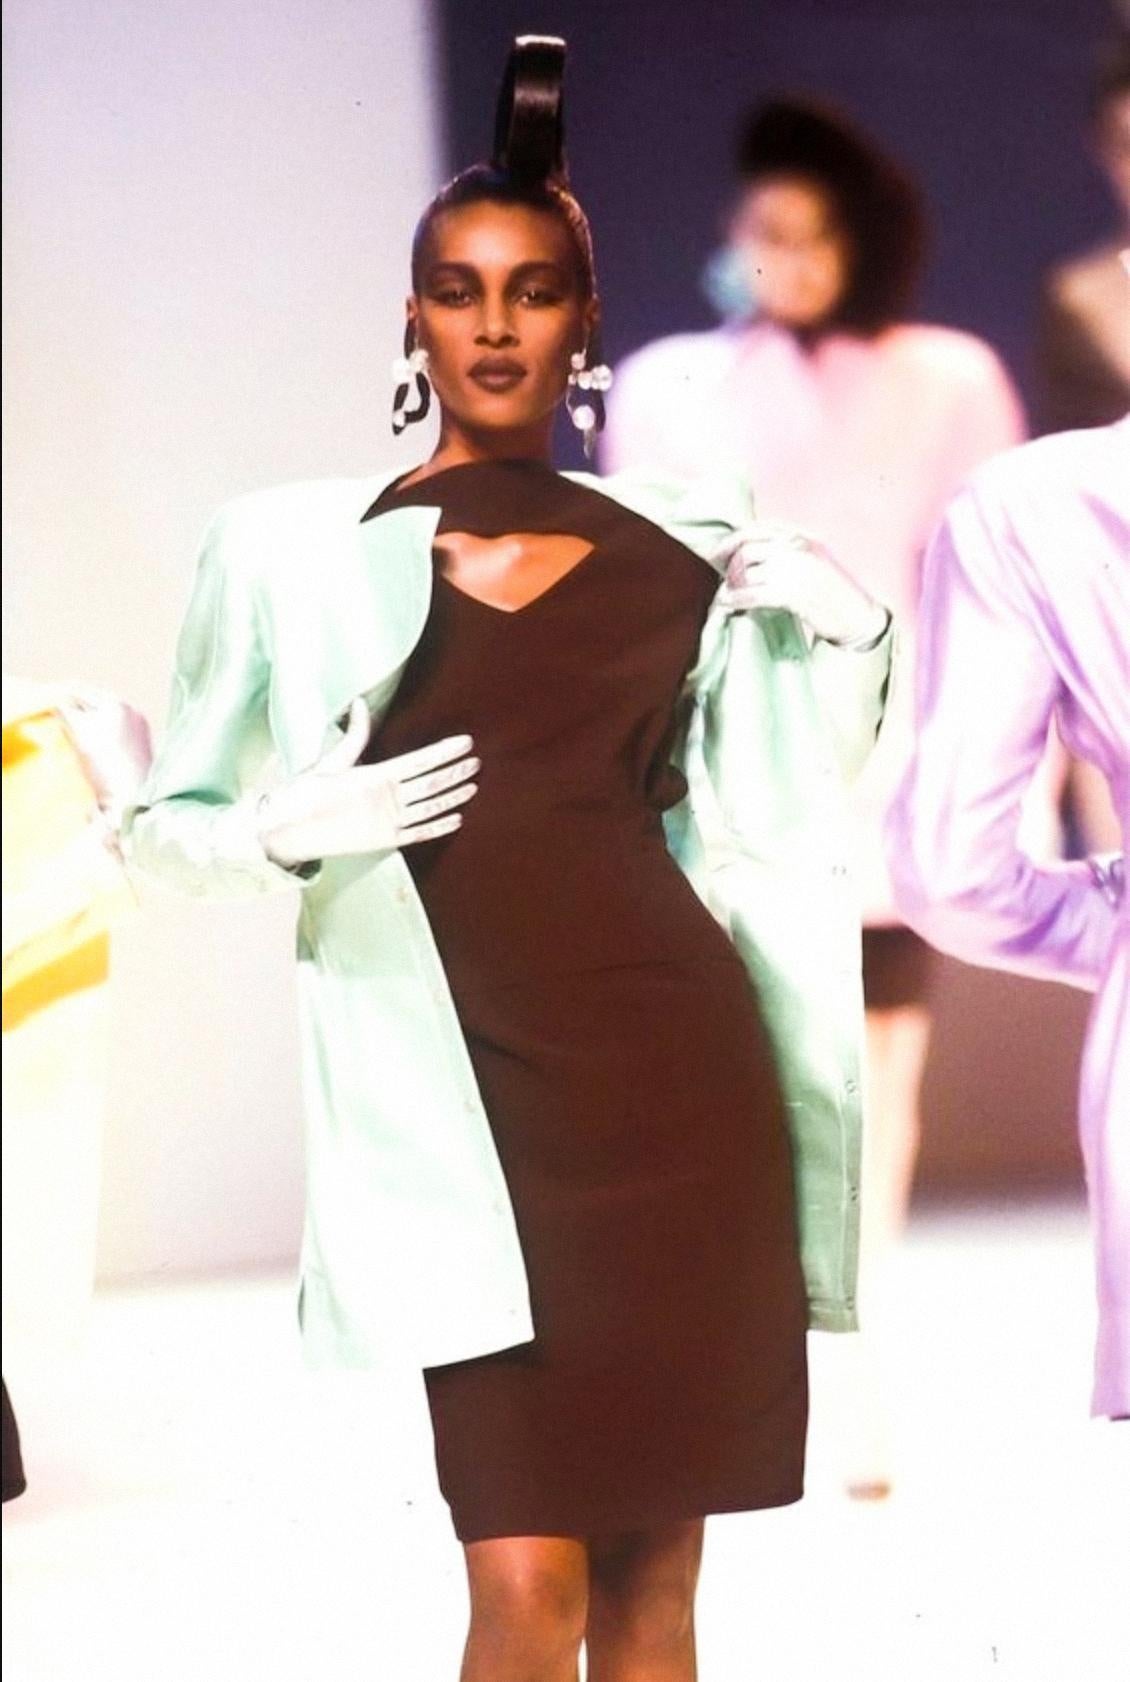 
What an extraordinairy find!! Extremely rare Collectors Piece: Thierry Mugler dress 'African Summer' Spring Summer Collection 1988
Documented and Featured on the legendary runway show 1988.
This shape and constructions is amazing and unique - a